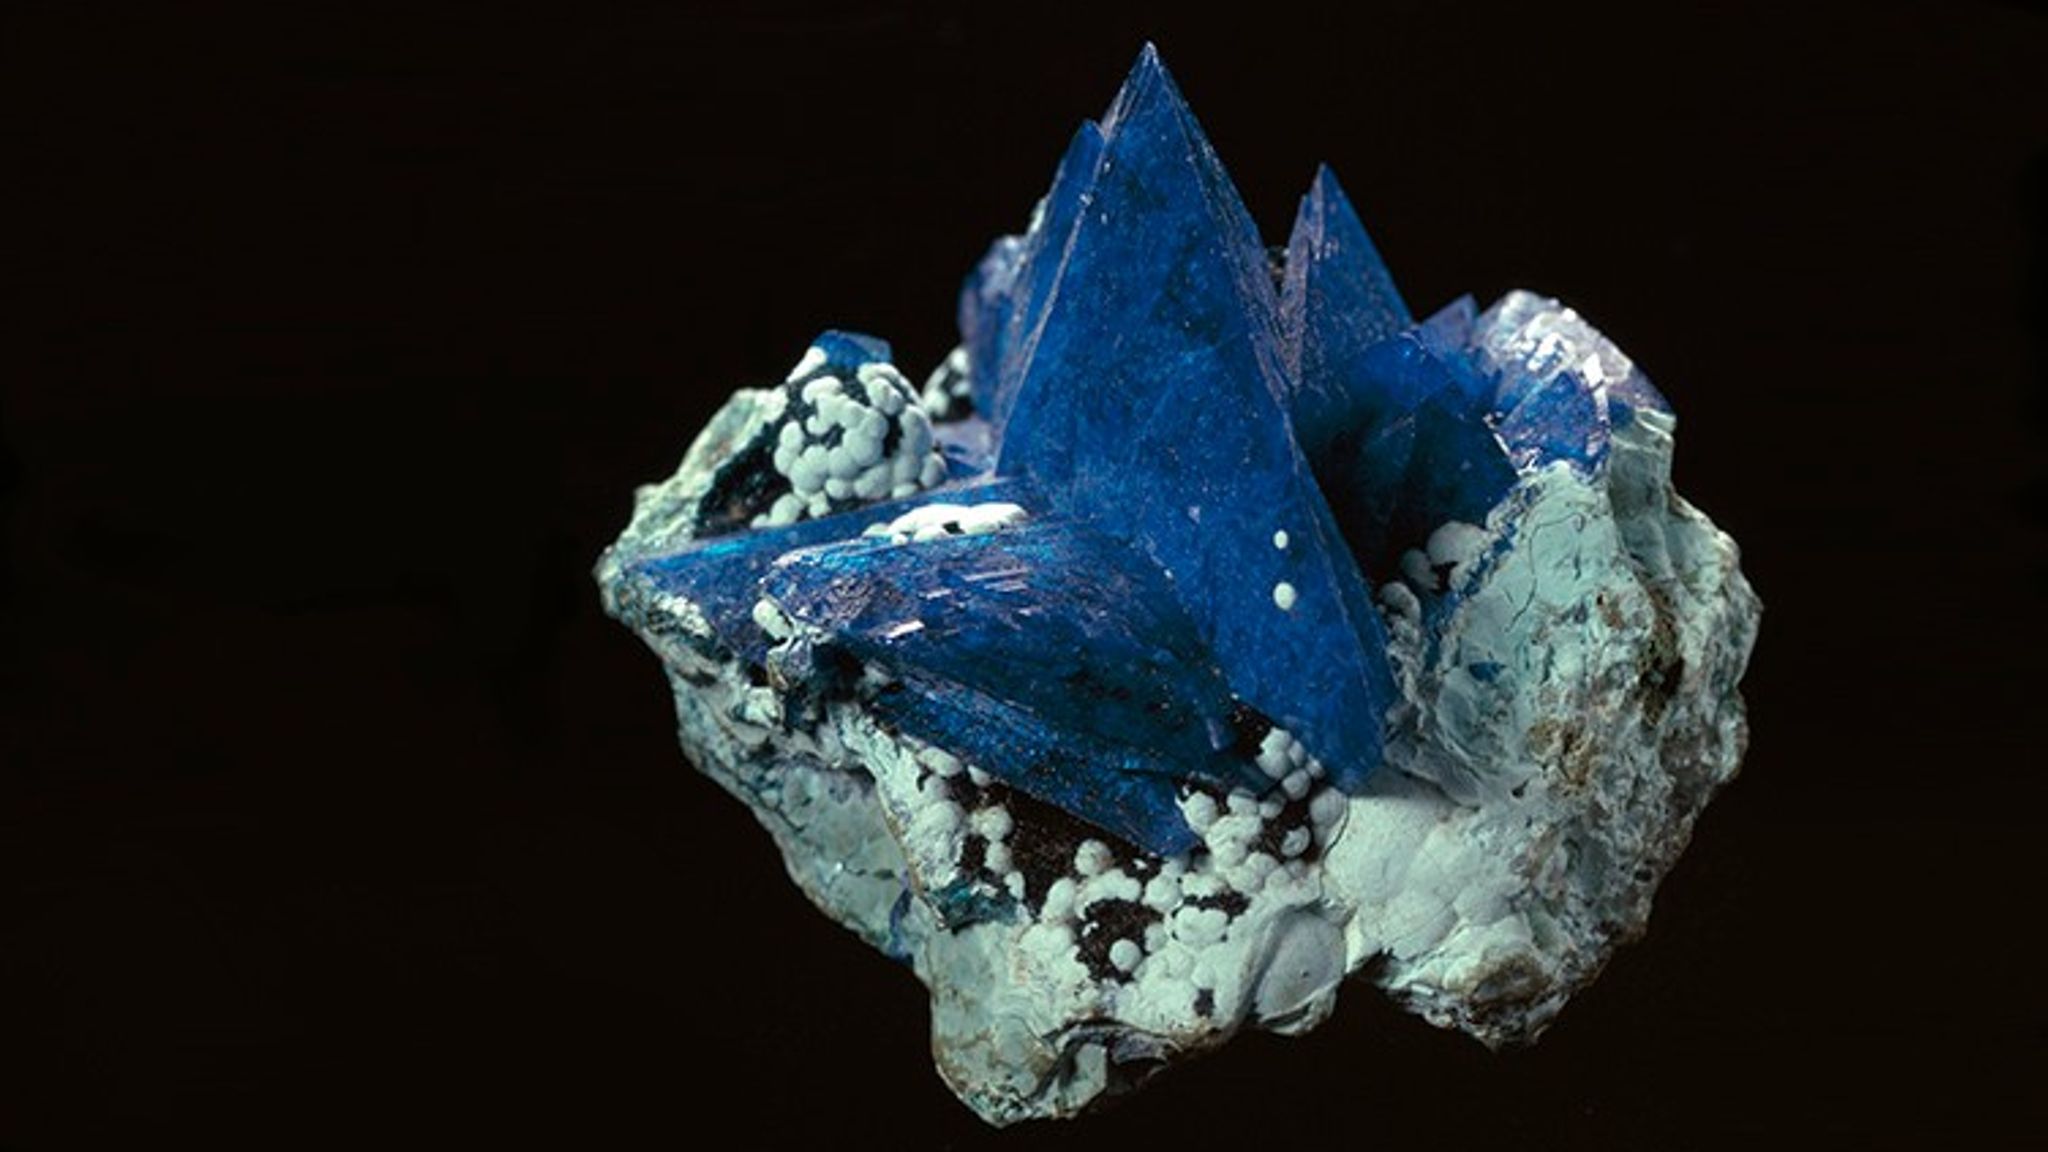 Kernowite New mineral species discovered on rock mined in Cornwall 220